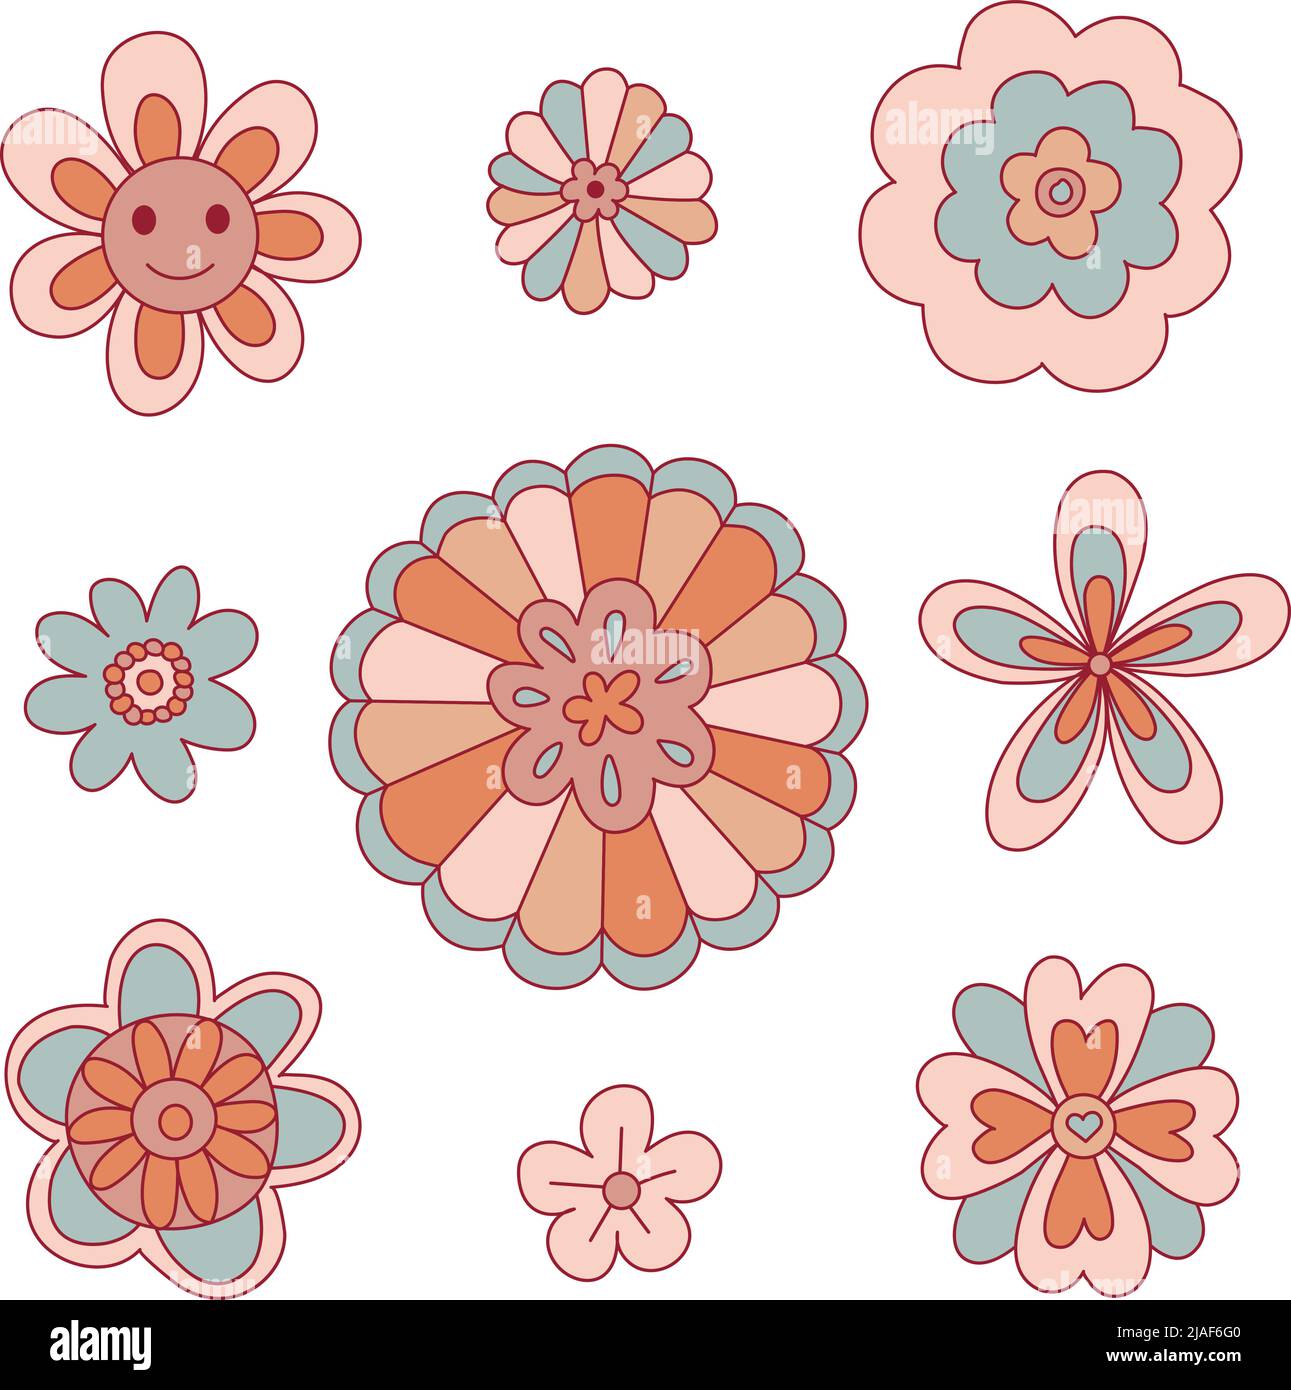 Groovy smiley face blossom hippie flower isolated Vector Image